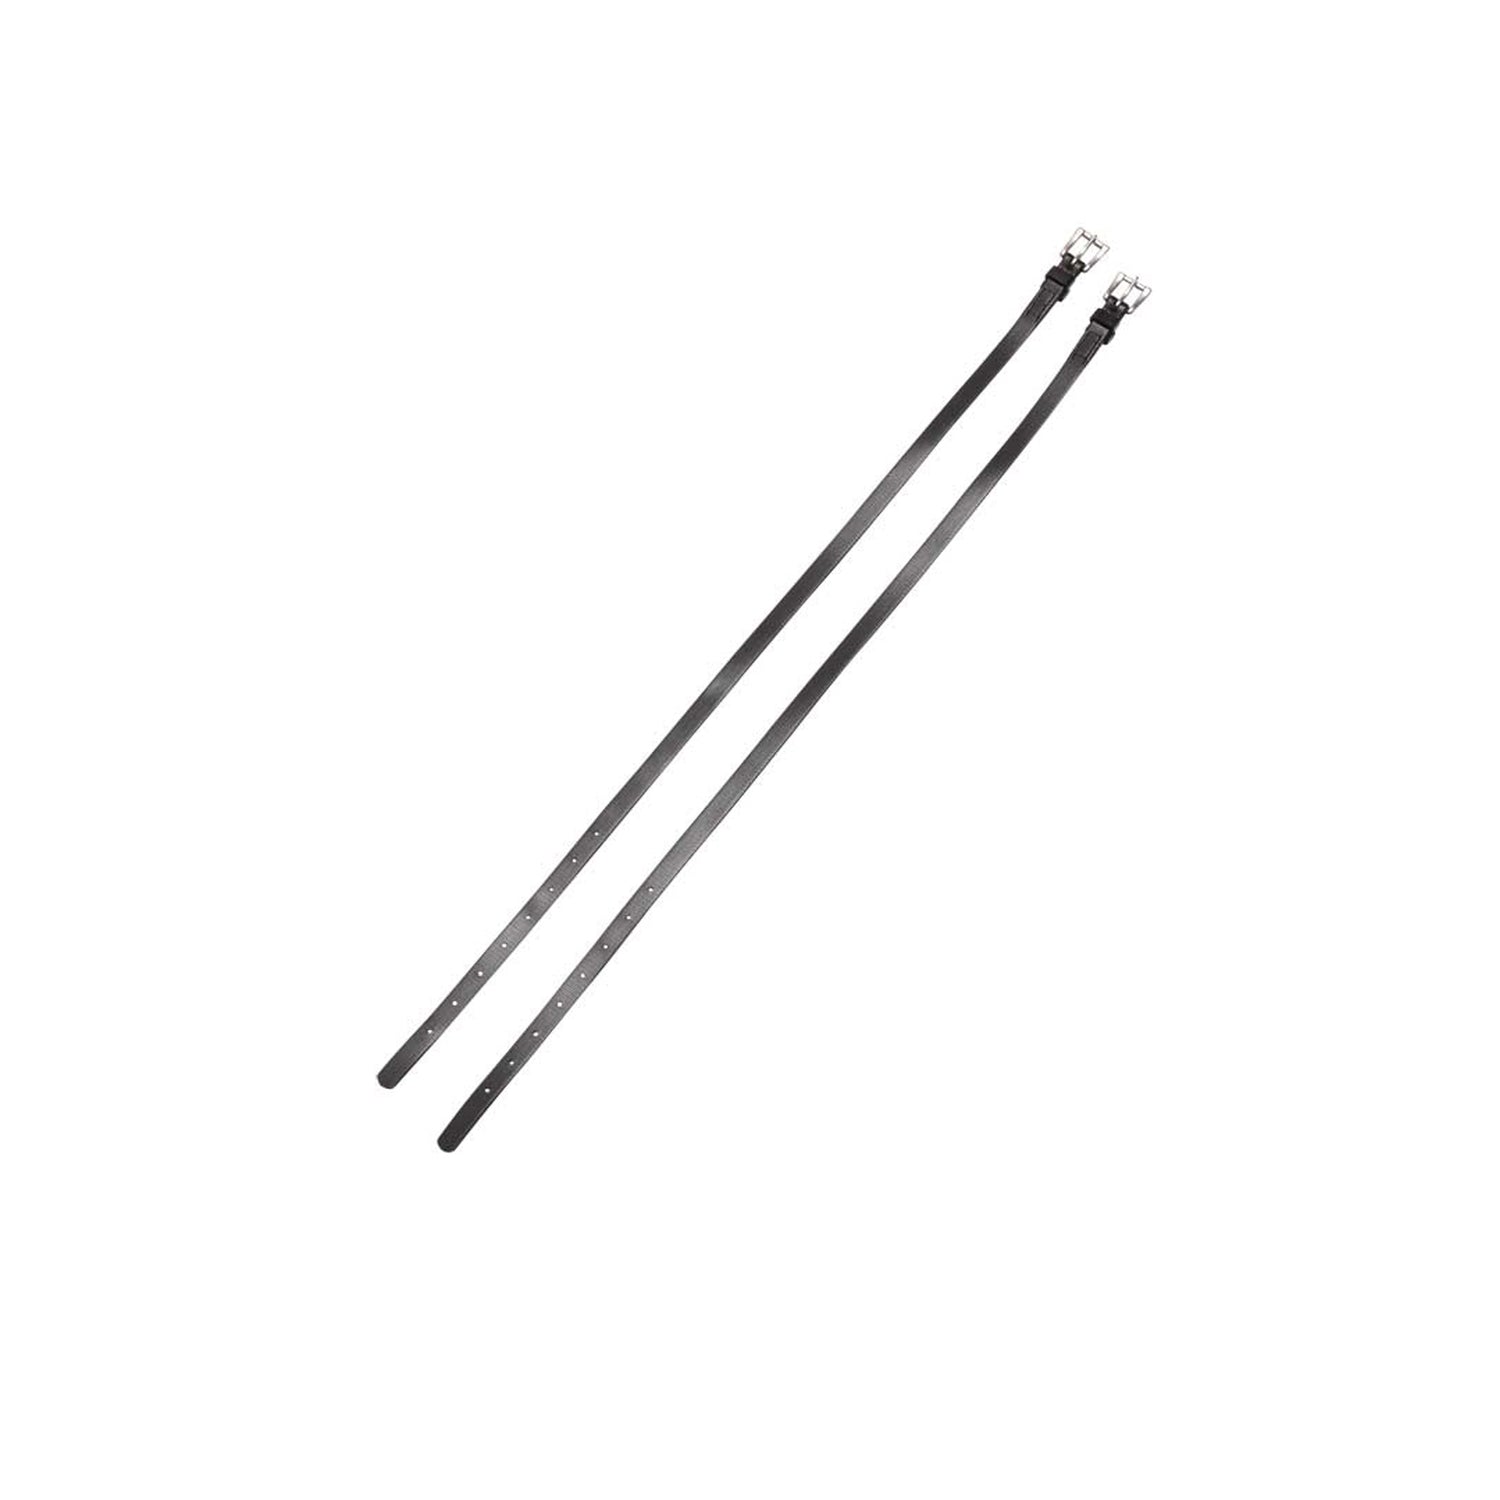 Straps for Bar Spreaders - Animalcare Supplies